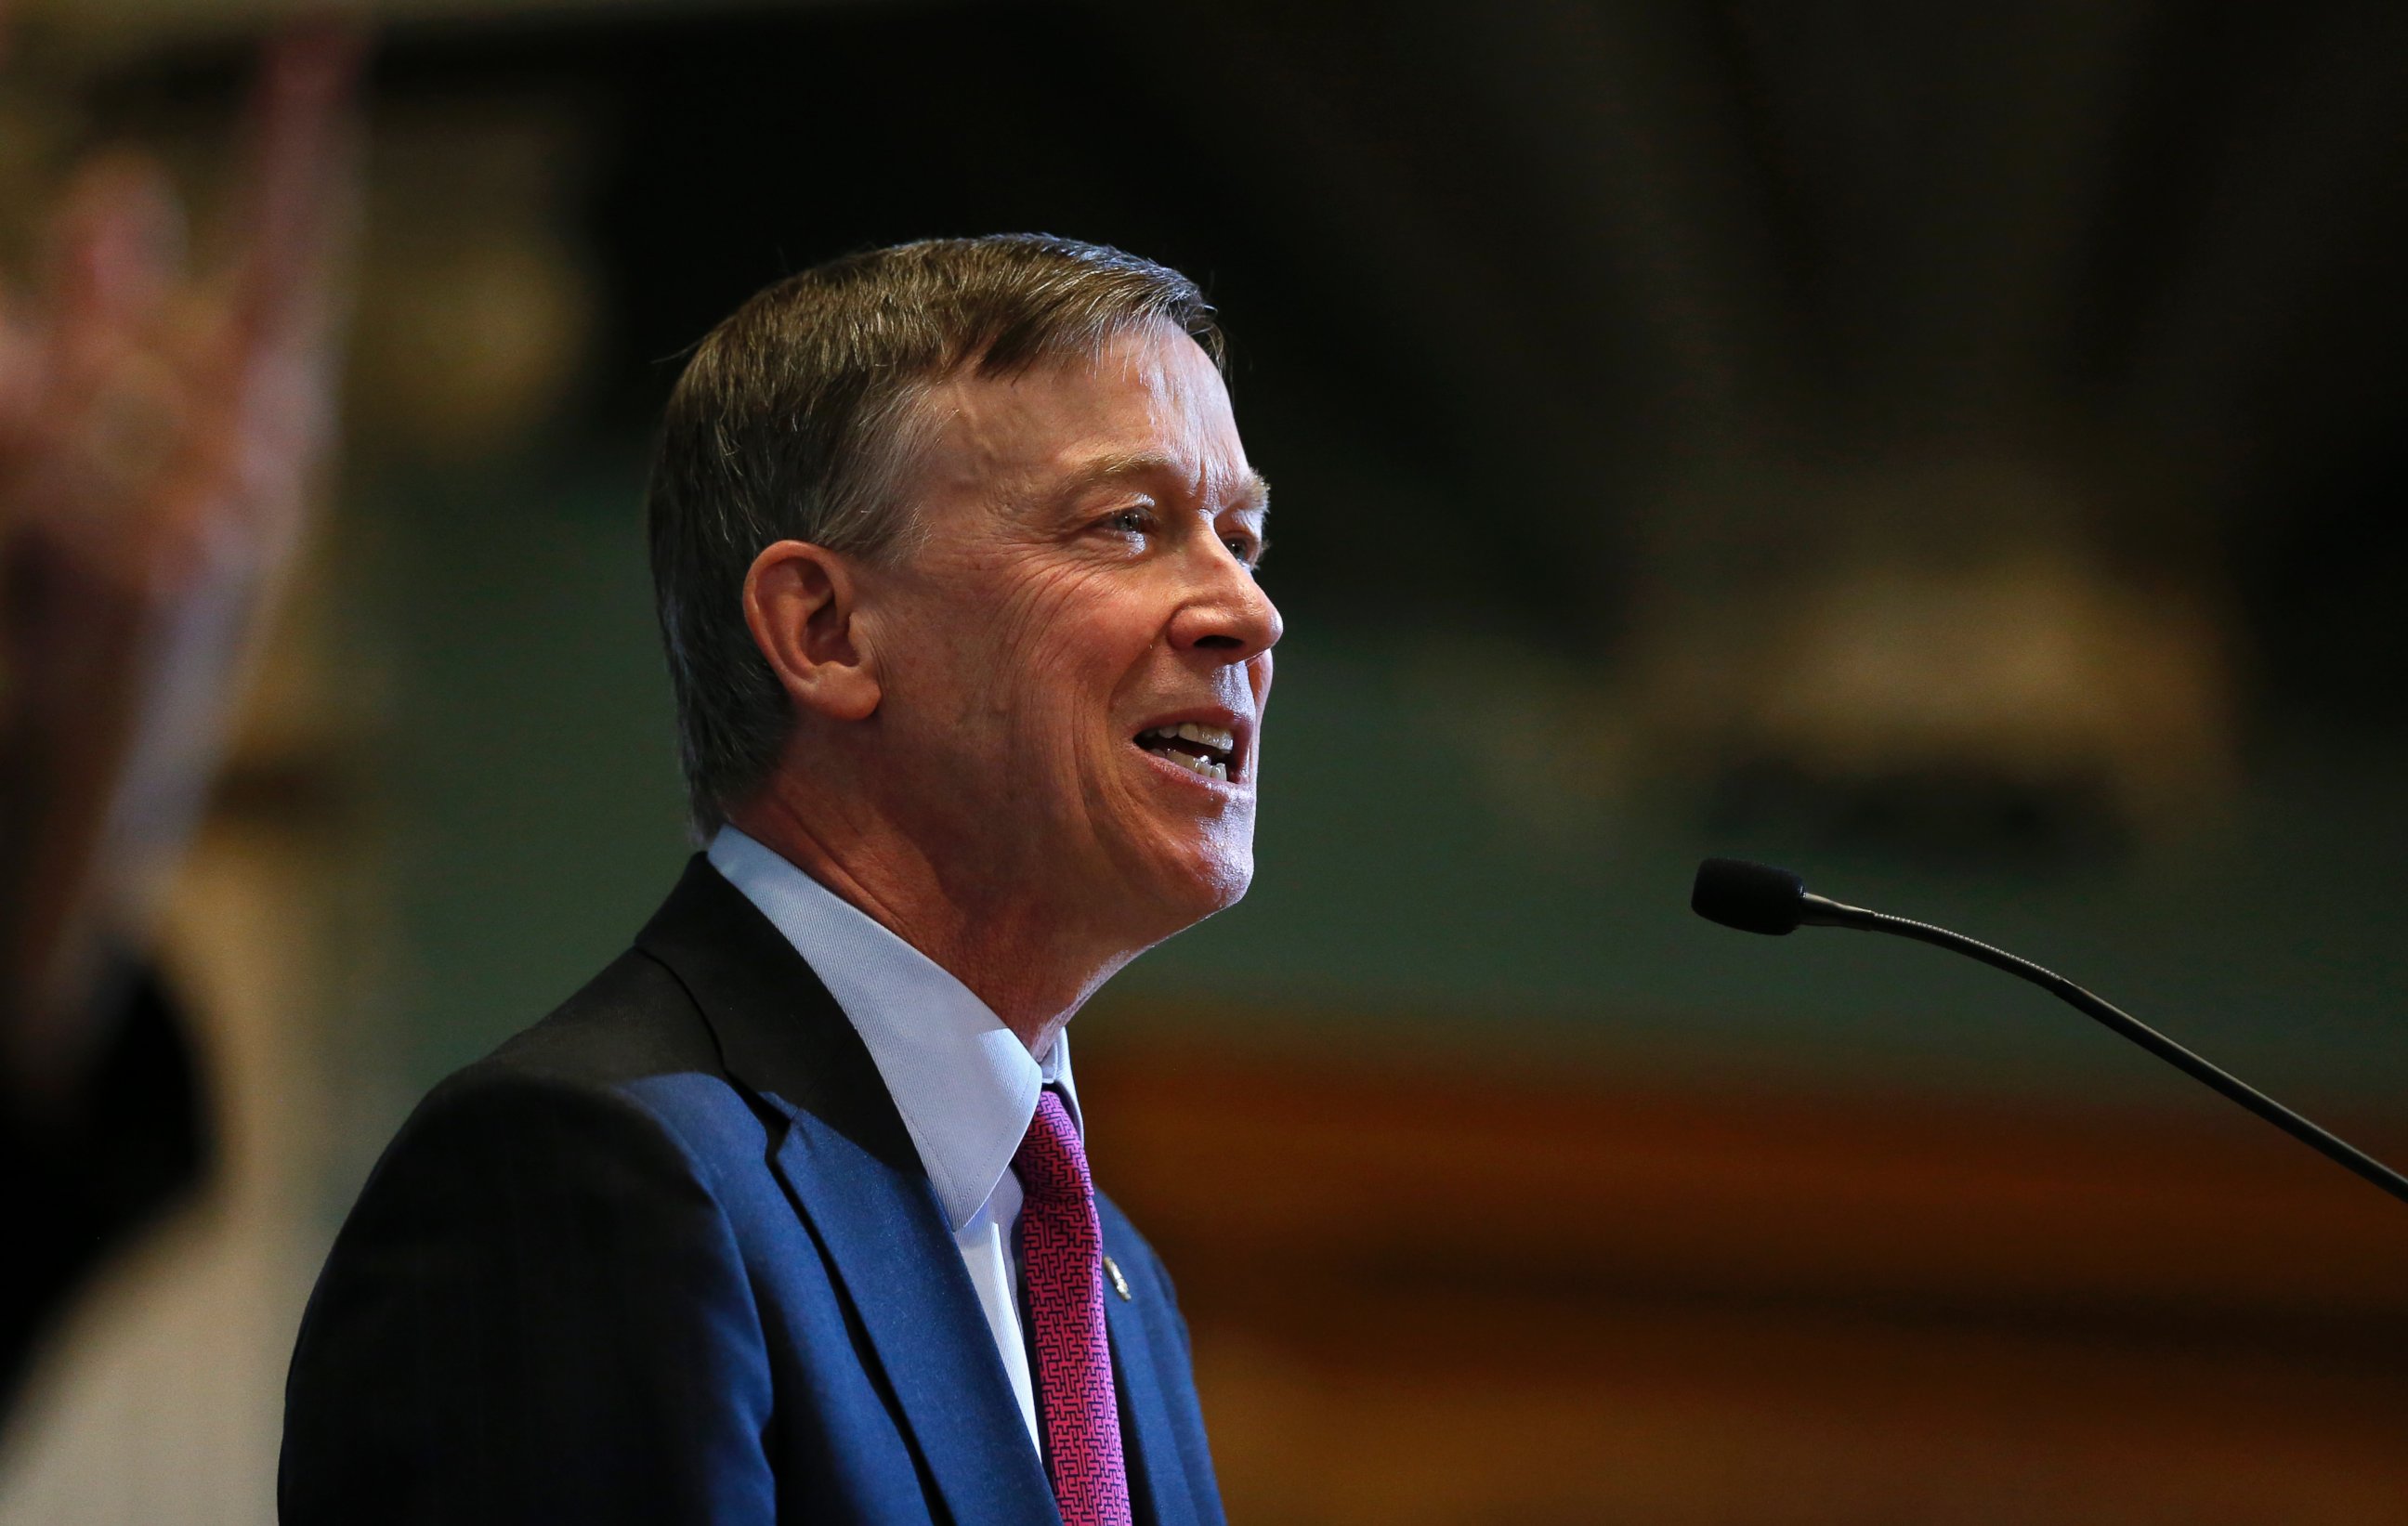 PHOTO: Colorado Gov. John Hickenlooper delivers his annual State of the State address to lawmakers and guests, inside the state legislature, in Denver, Jan. 14, 2016.